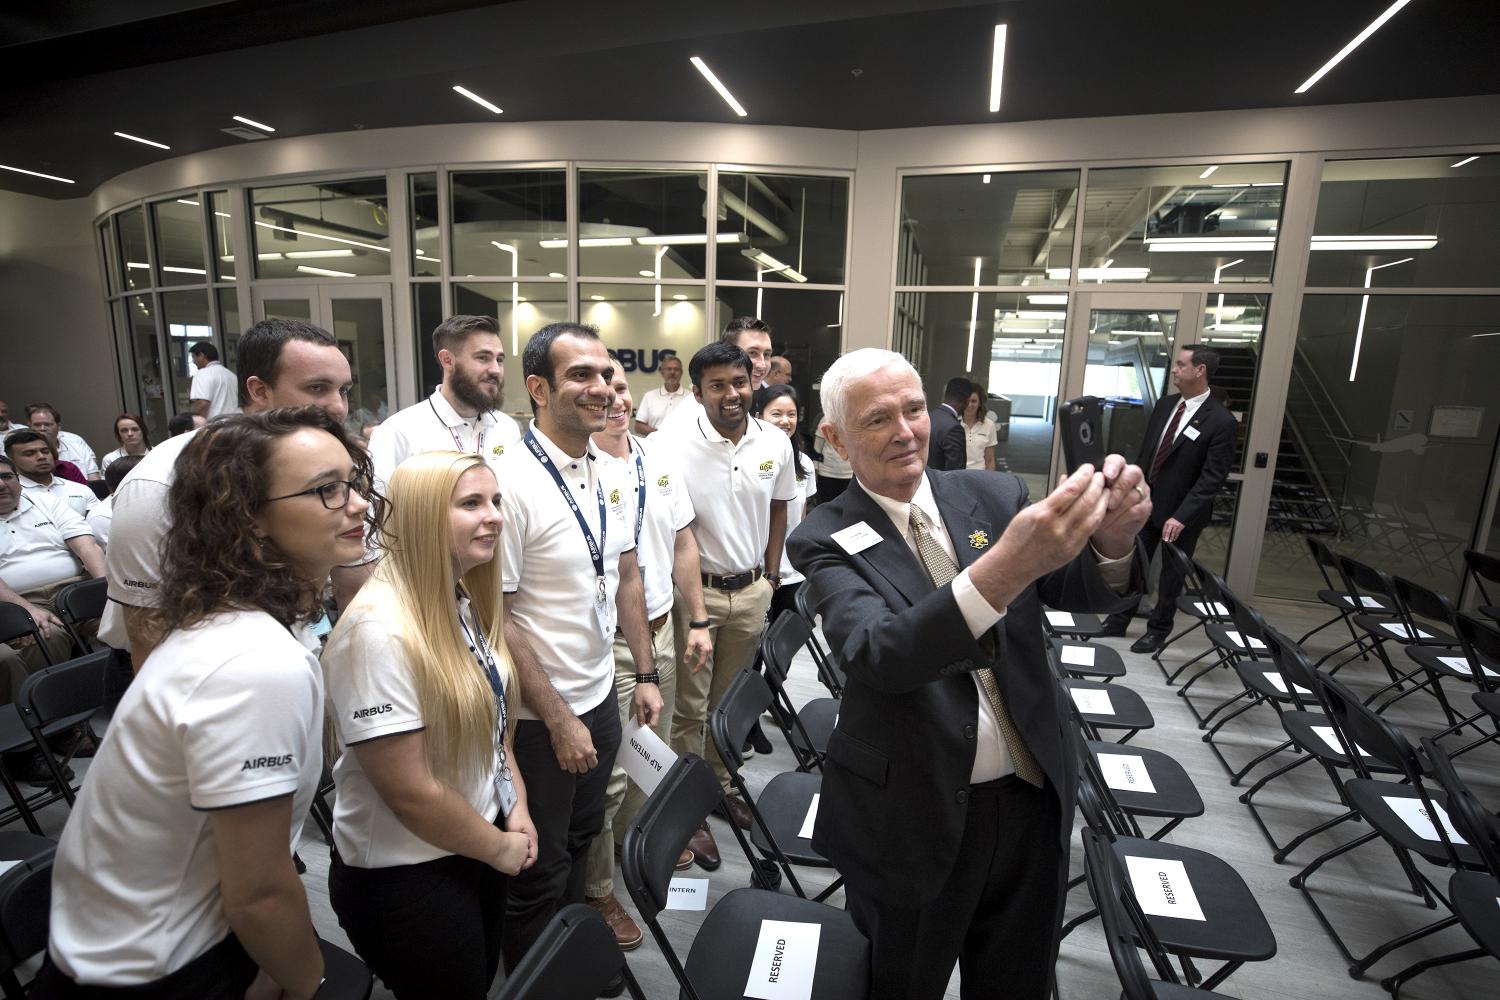 President John Bardo takes a selfie with students at the AirBus Americas grand opening last week.